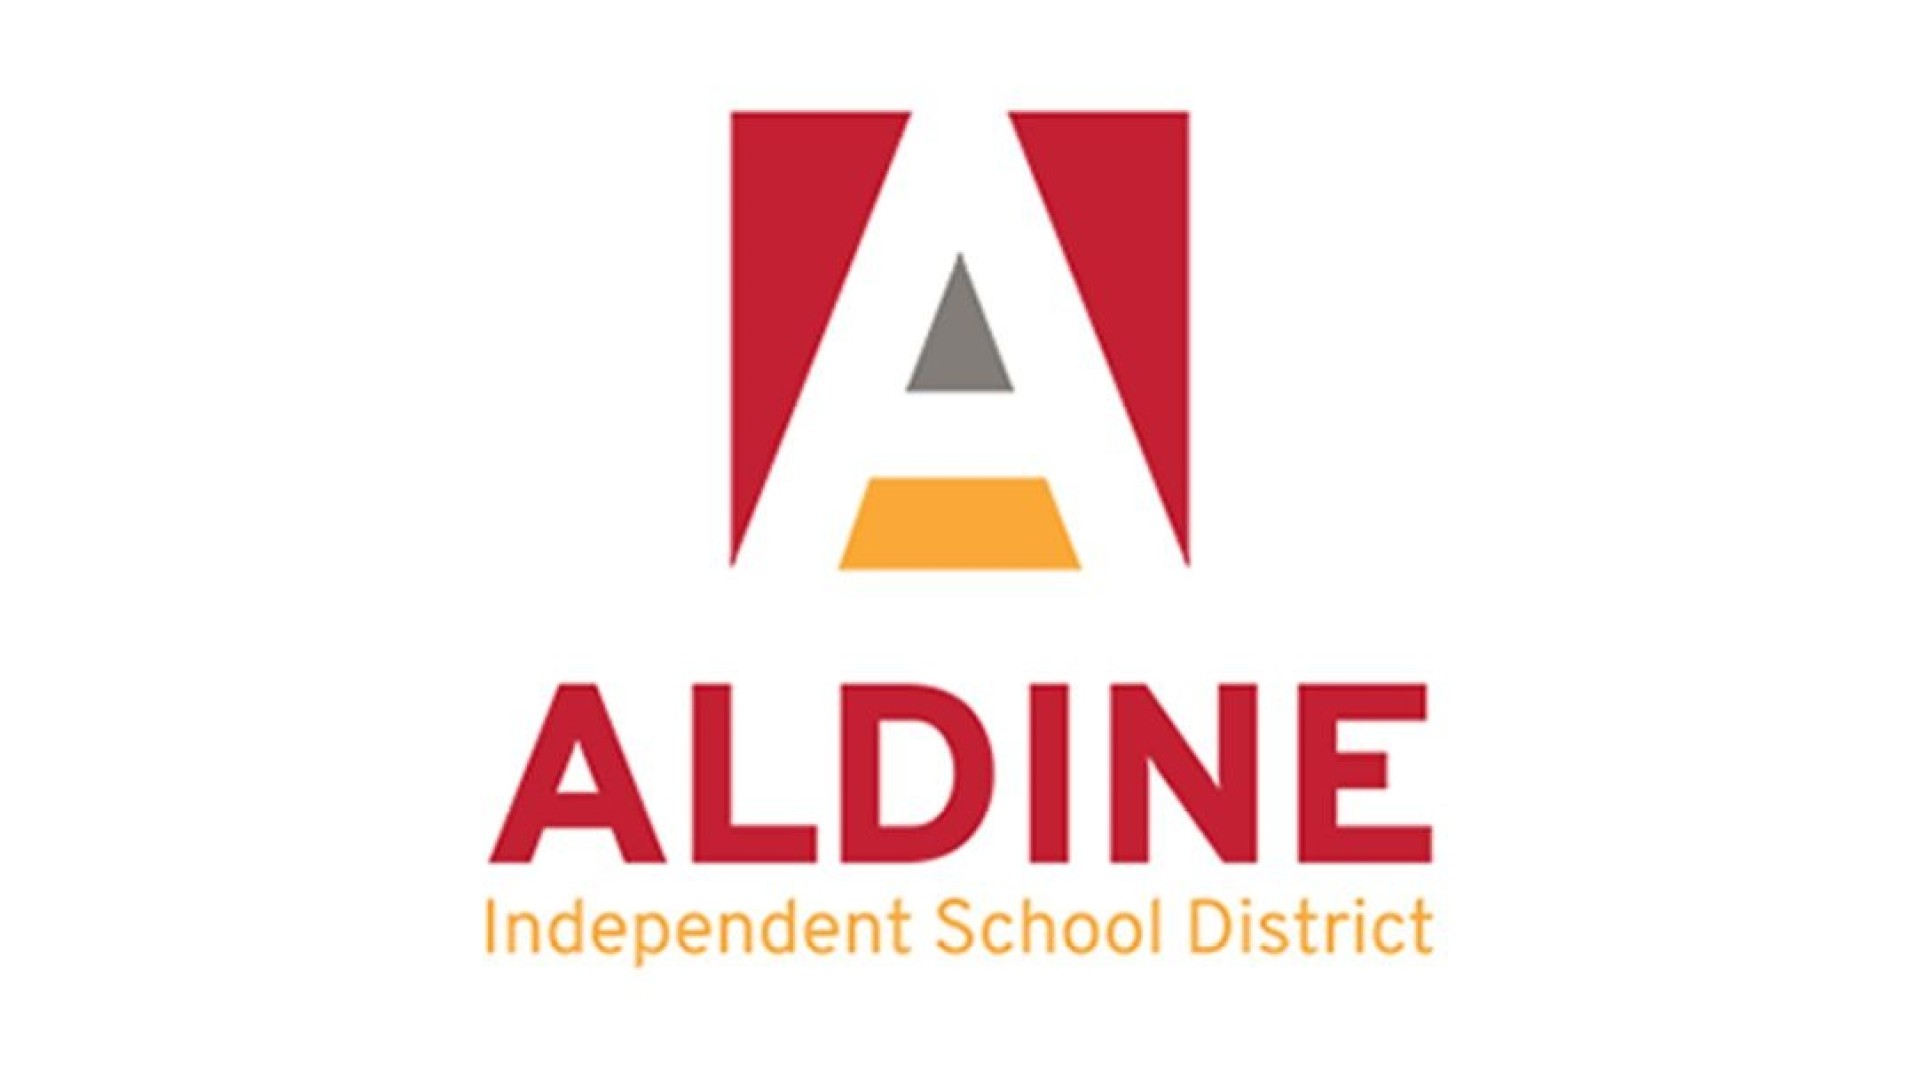 Aldine Isd What You Need To Know About The District S 2020 2021 School Plans